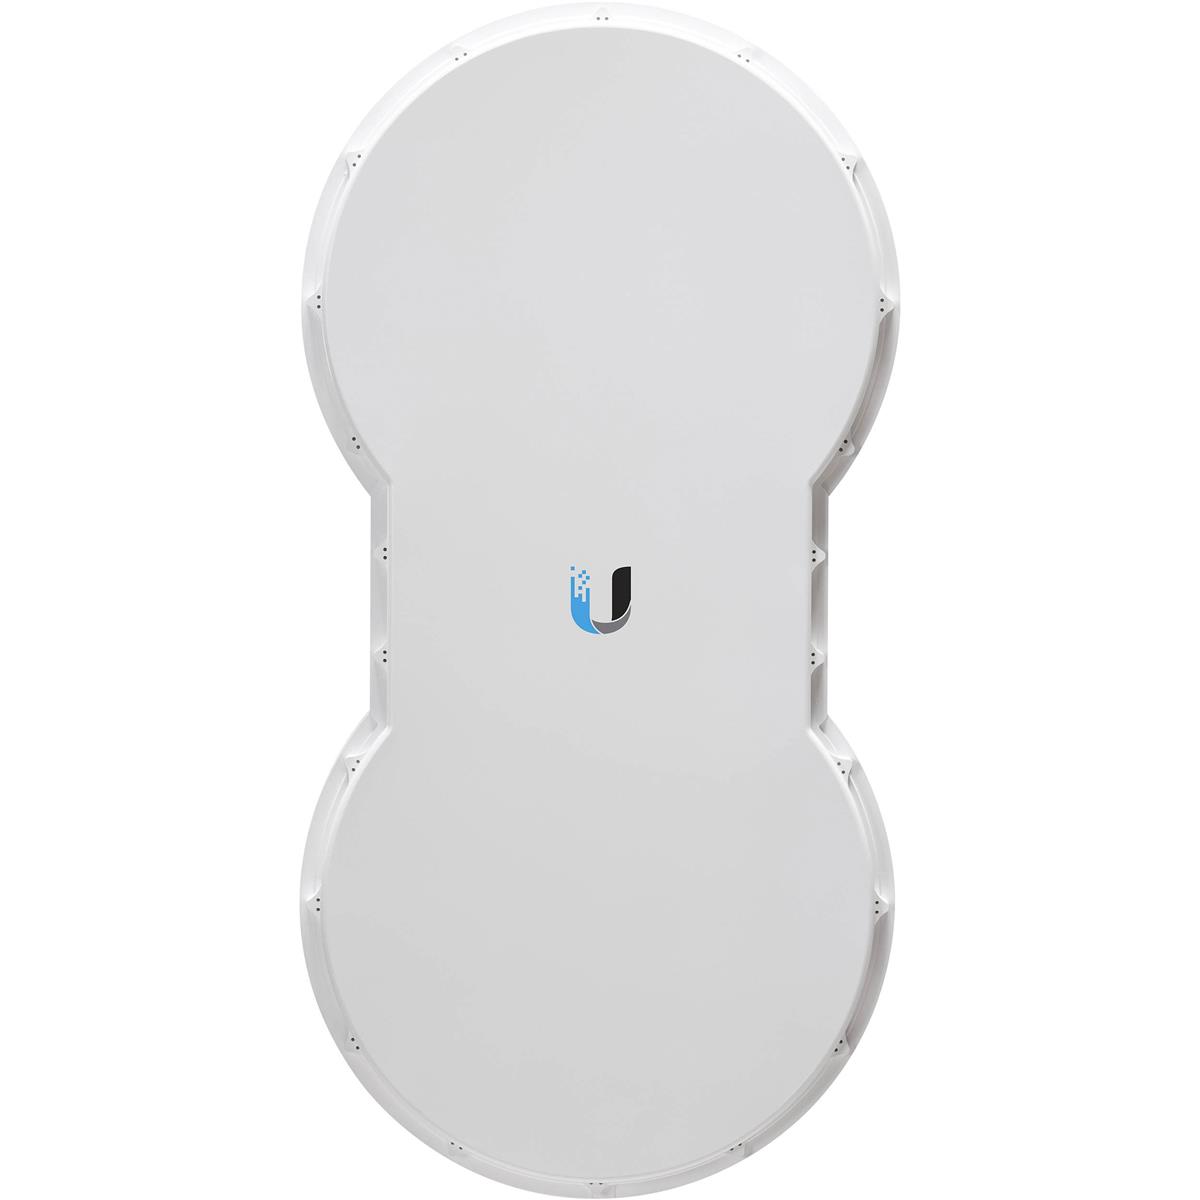 Image of Ubiquiti Networks airFiber-5U 5GHz Carrier Class Point-to-Point Gigabit Radio